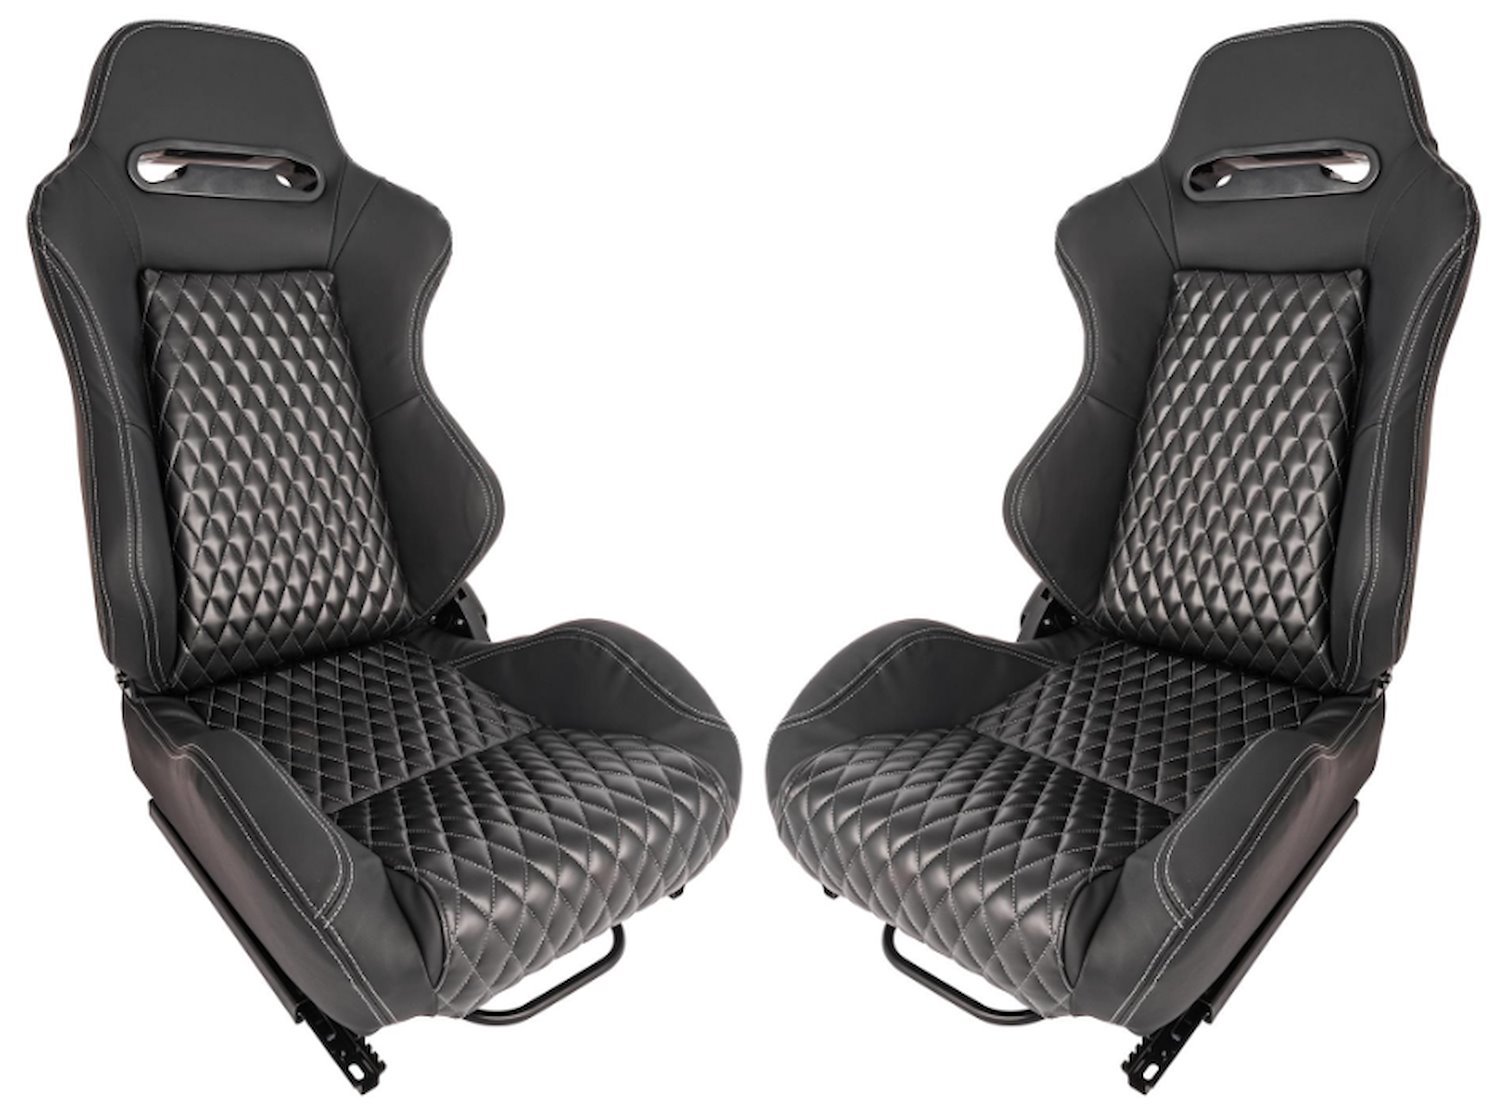 Racing High Back Sport Seat Kit Includes Left/Driver & Right/Passenger Side Seats